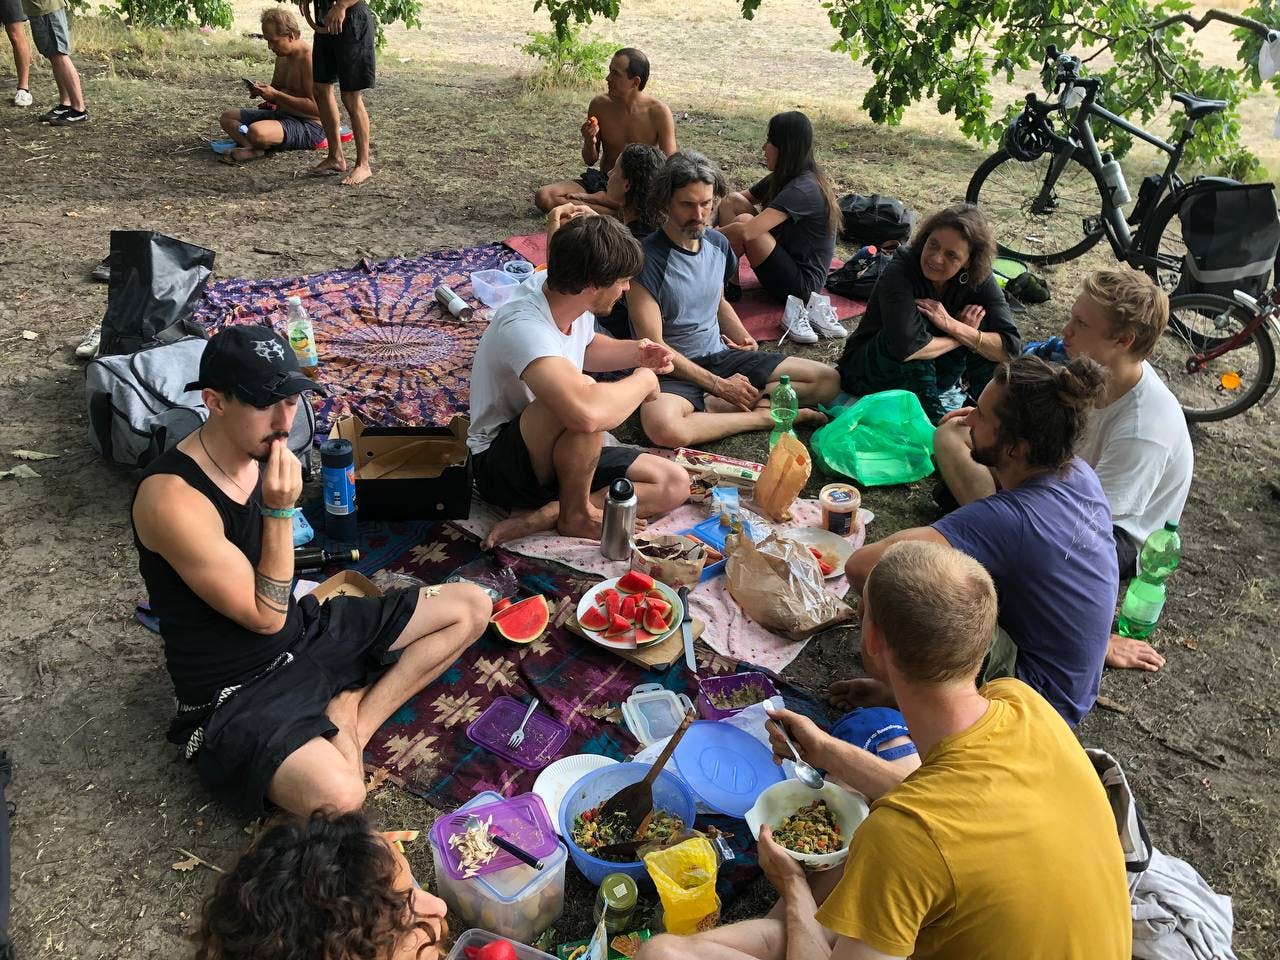 group of people sitting on the ground eating together